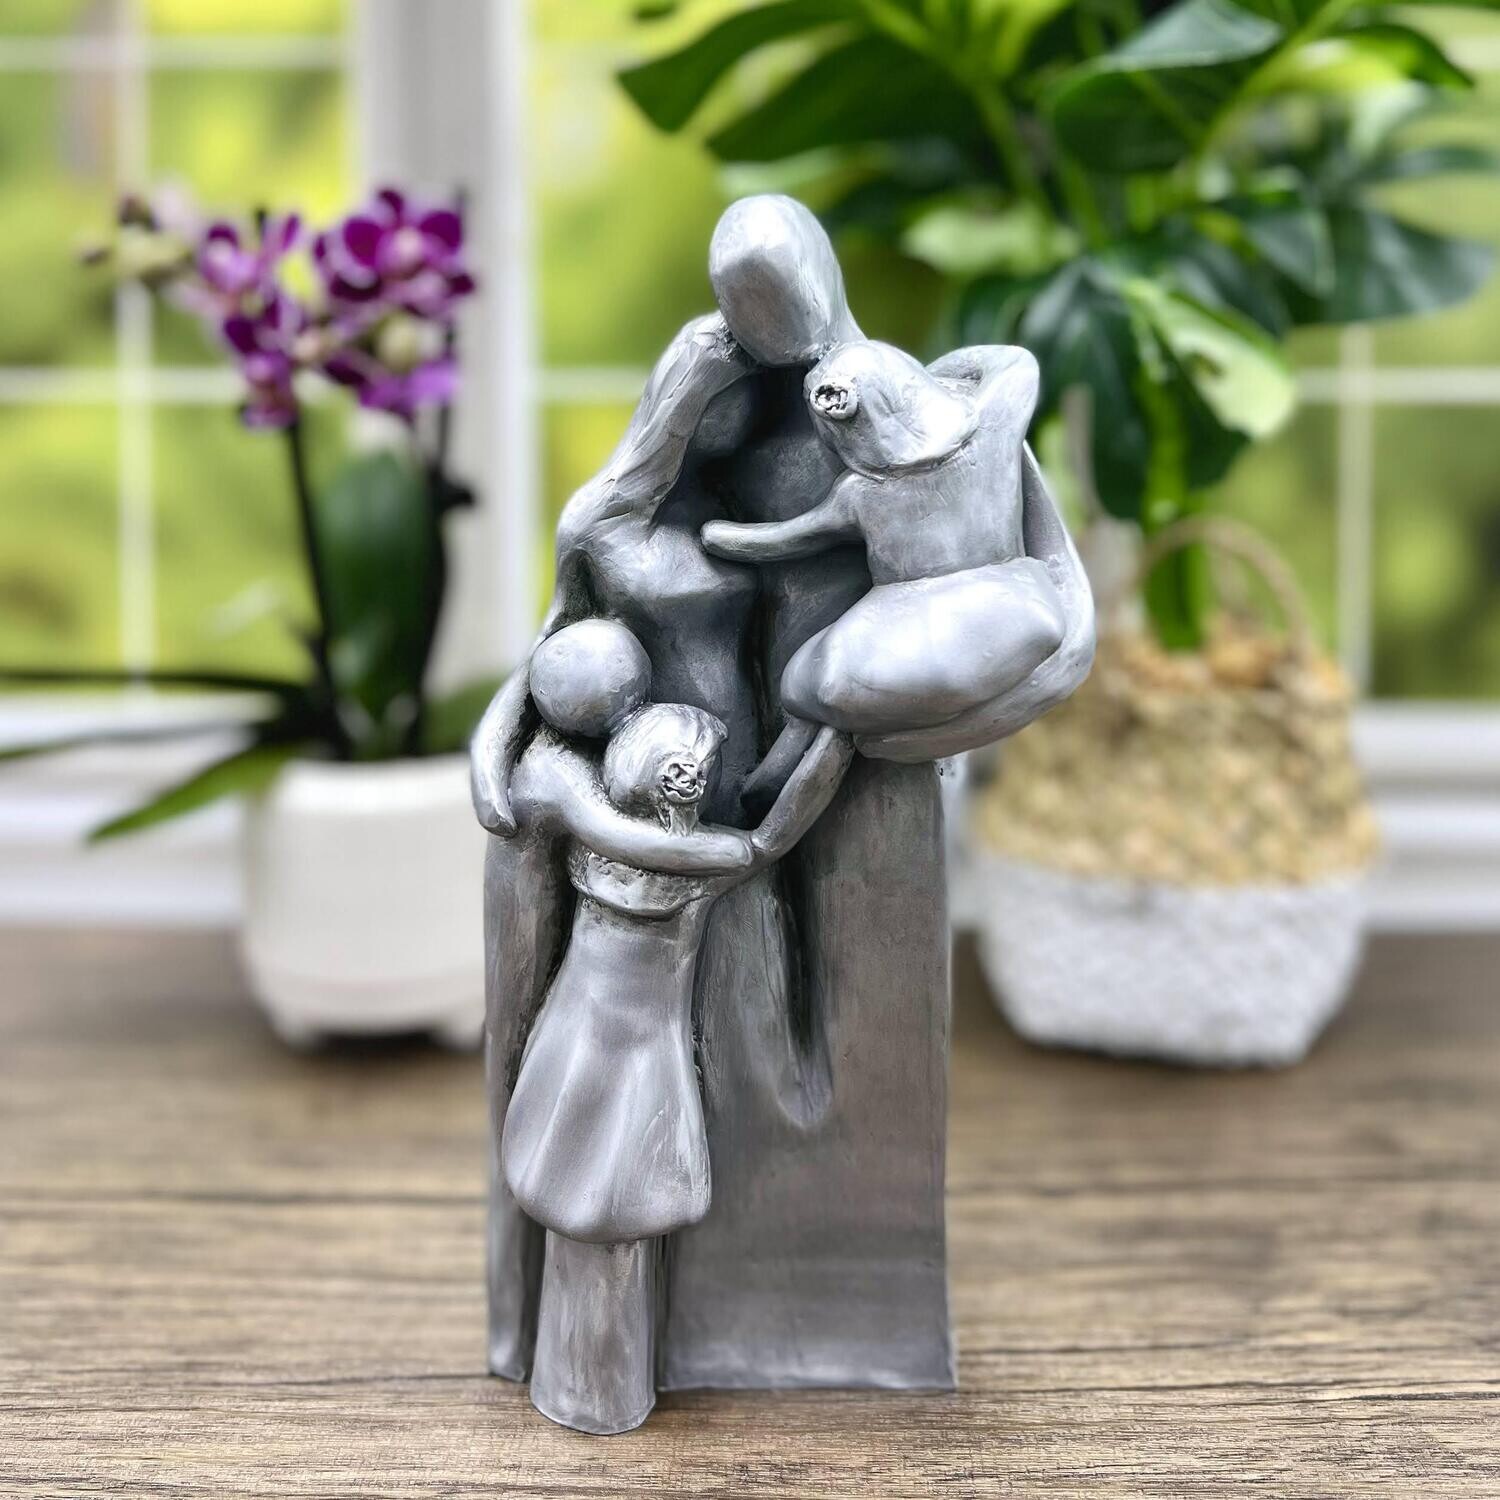 10th Anniversary Gift Aluminum Family Sculpture with Three Children